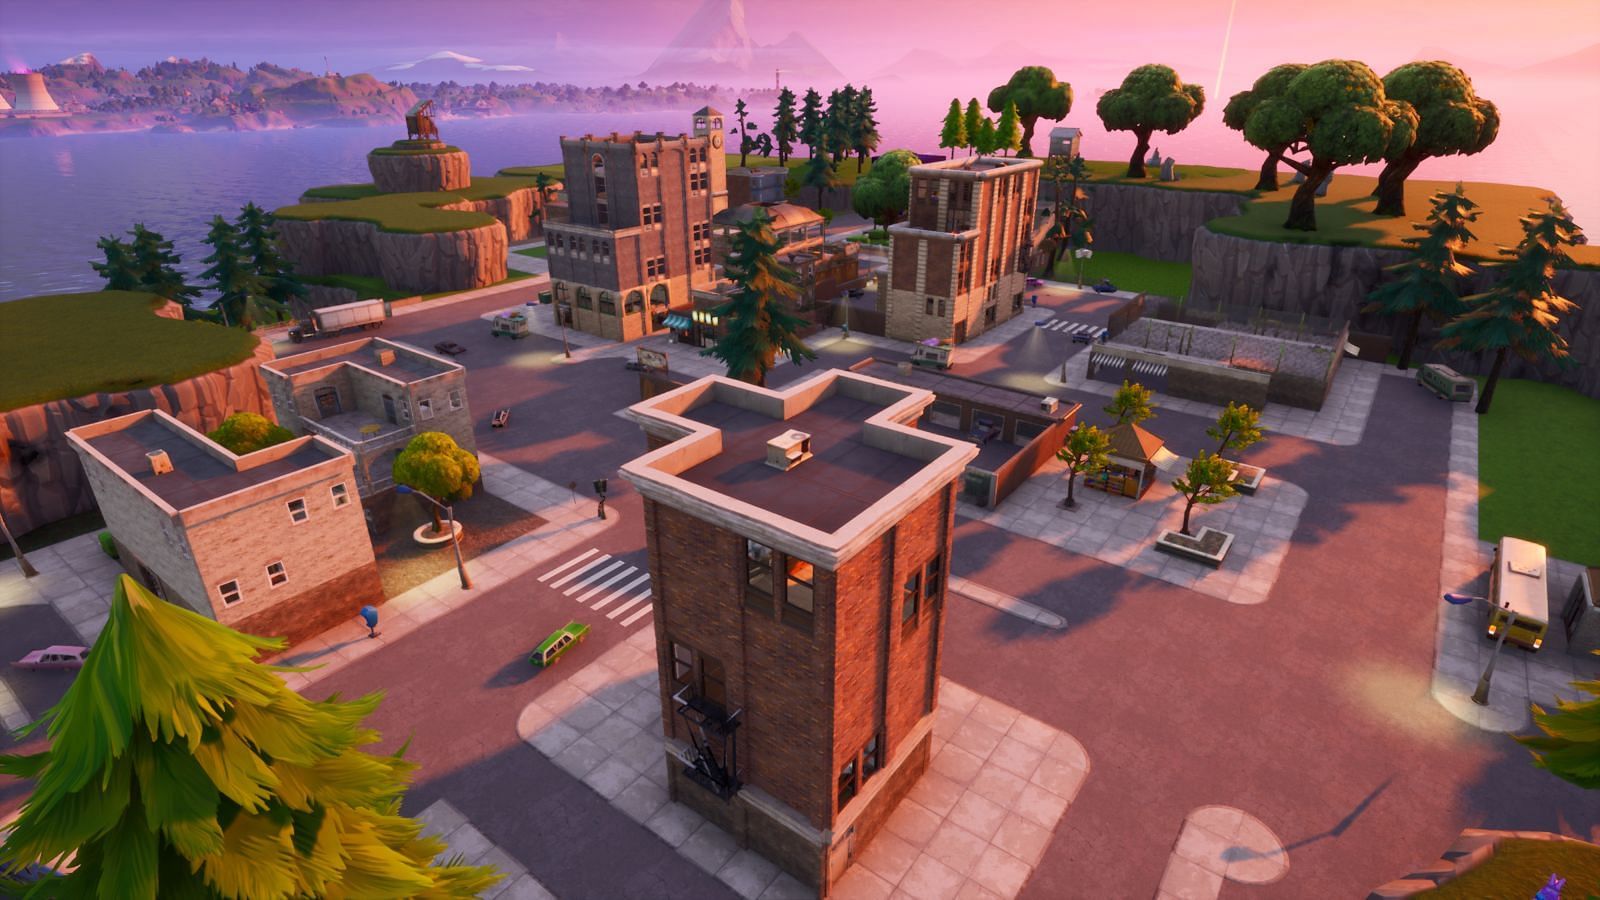 Tilted Towers could be returning in Chapter 3 Season 1 (Image via Epic Games)